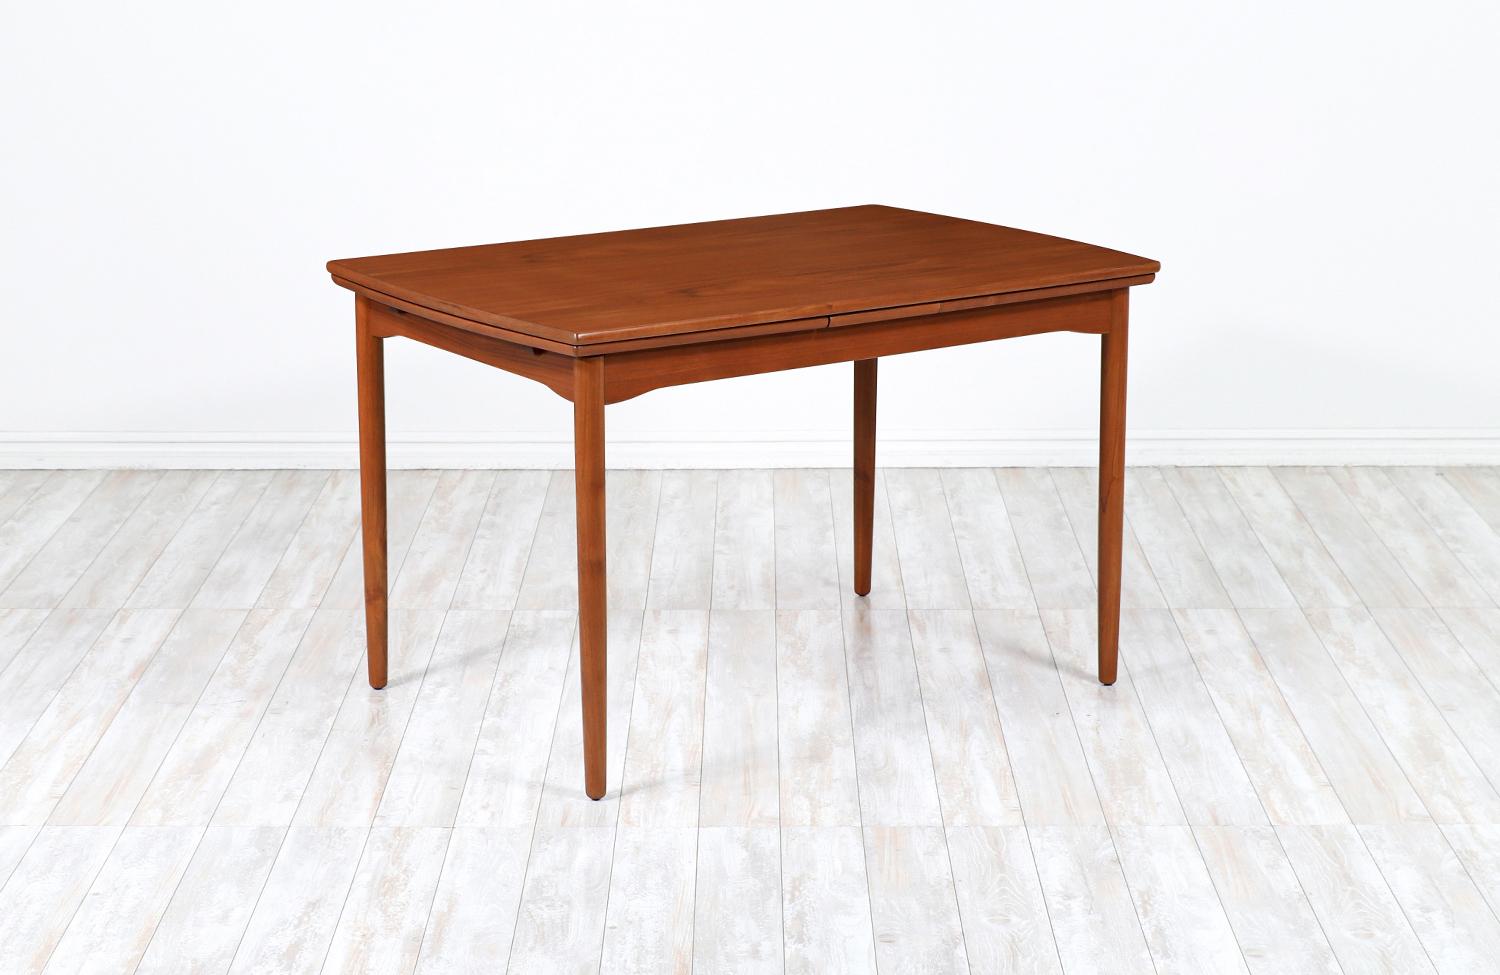 Beautiful draw-leaf dining table designed and manufactured in Denmark circa 1950s. This elegant and classic Danish design features a teak wood top supported by four solid taper legs creating a mixture of clean, modern lines and a gorgeous teak wood